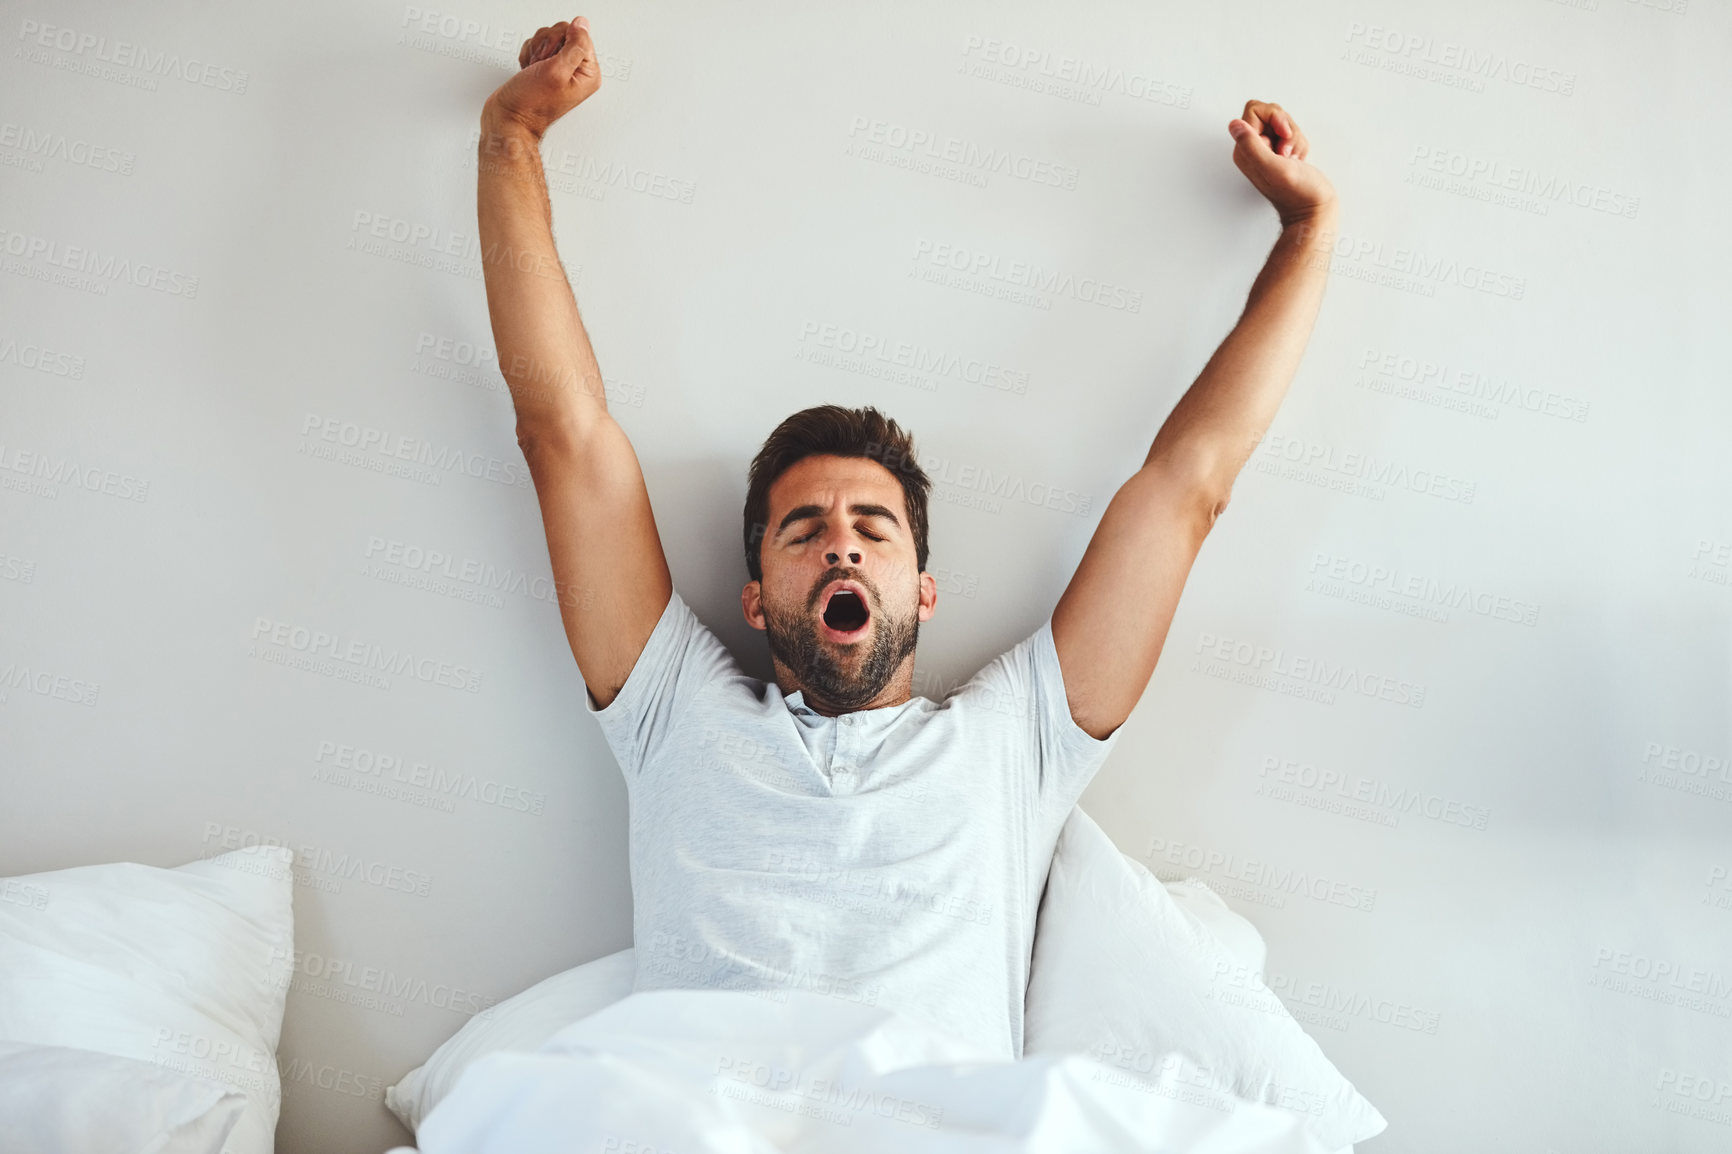 Buy stock photo Cropped shot of a tired young man stretching and yawning after waking up from a good night's sleep